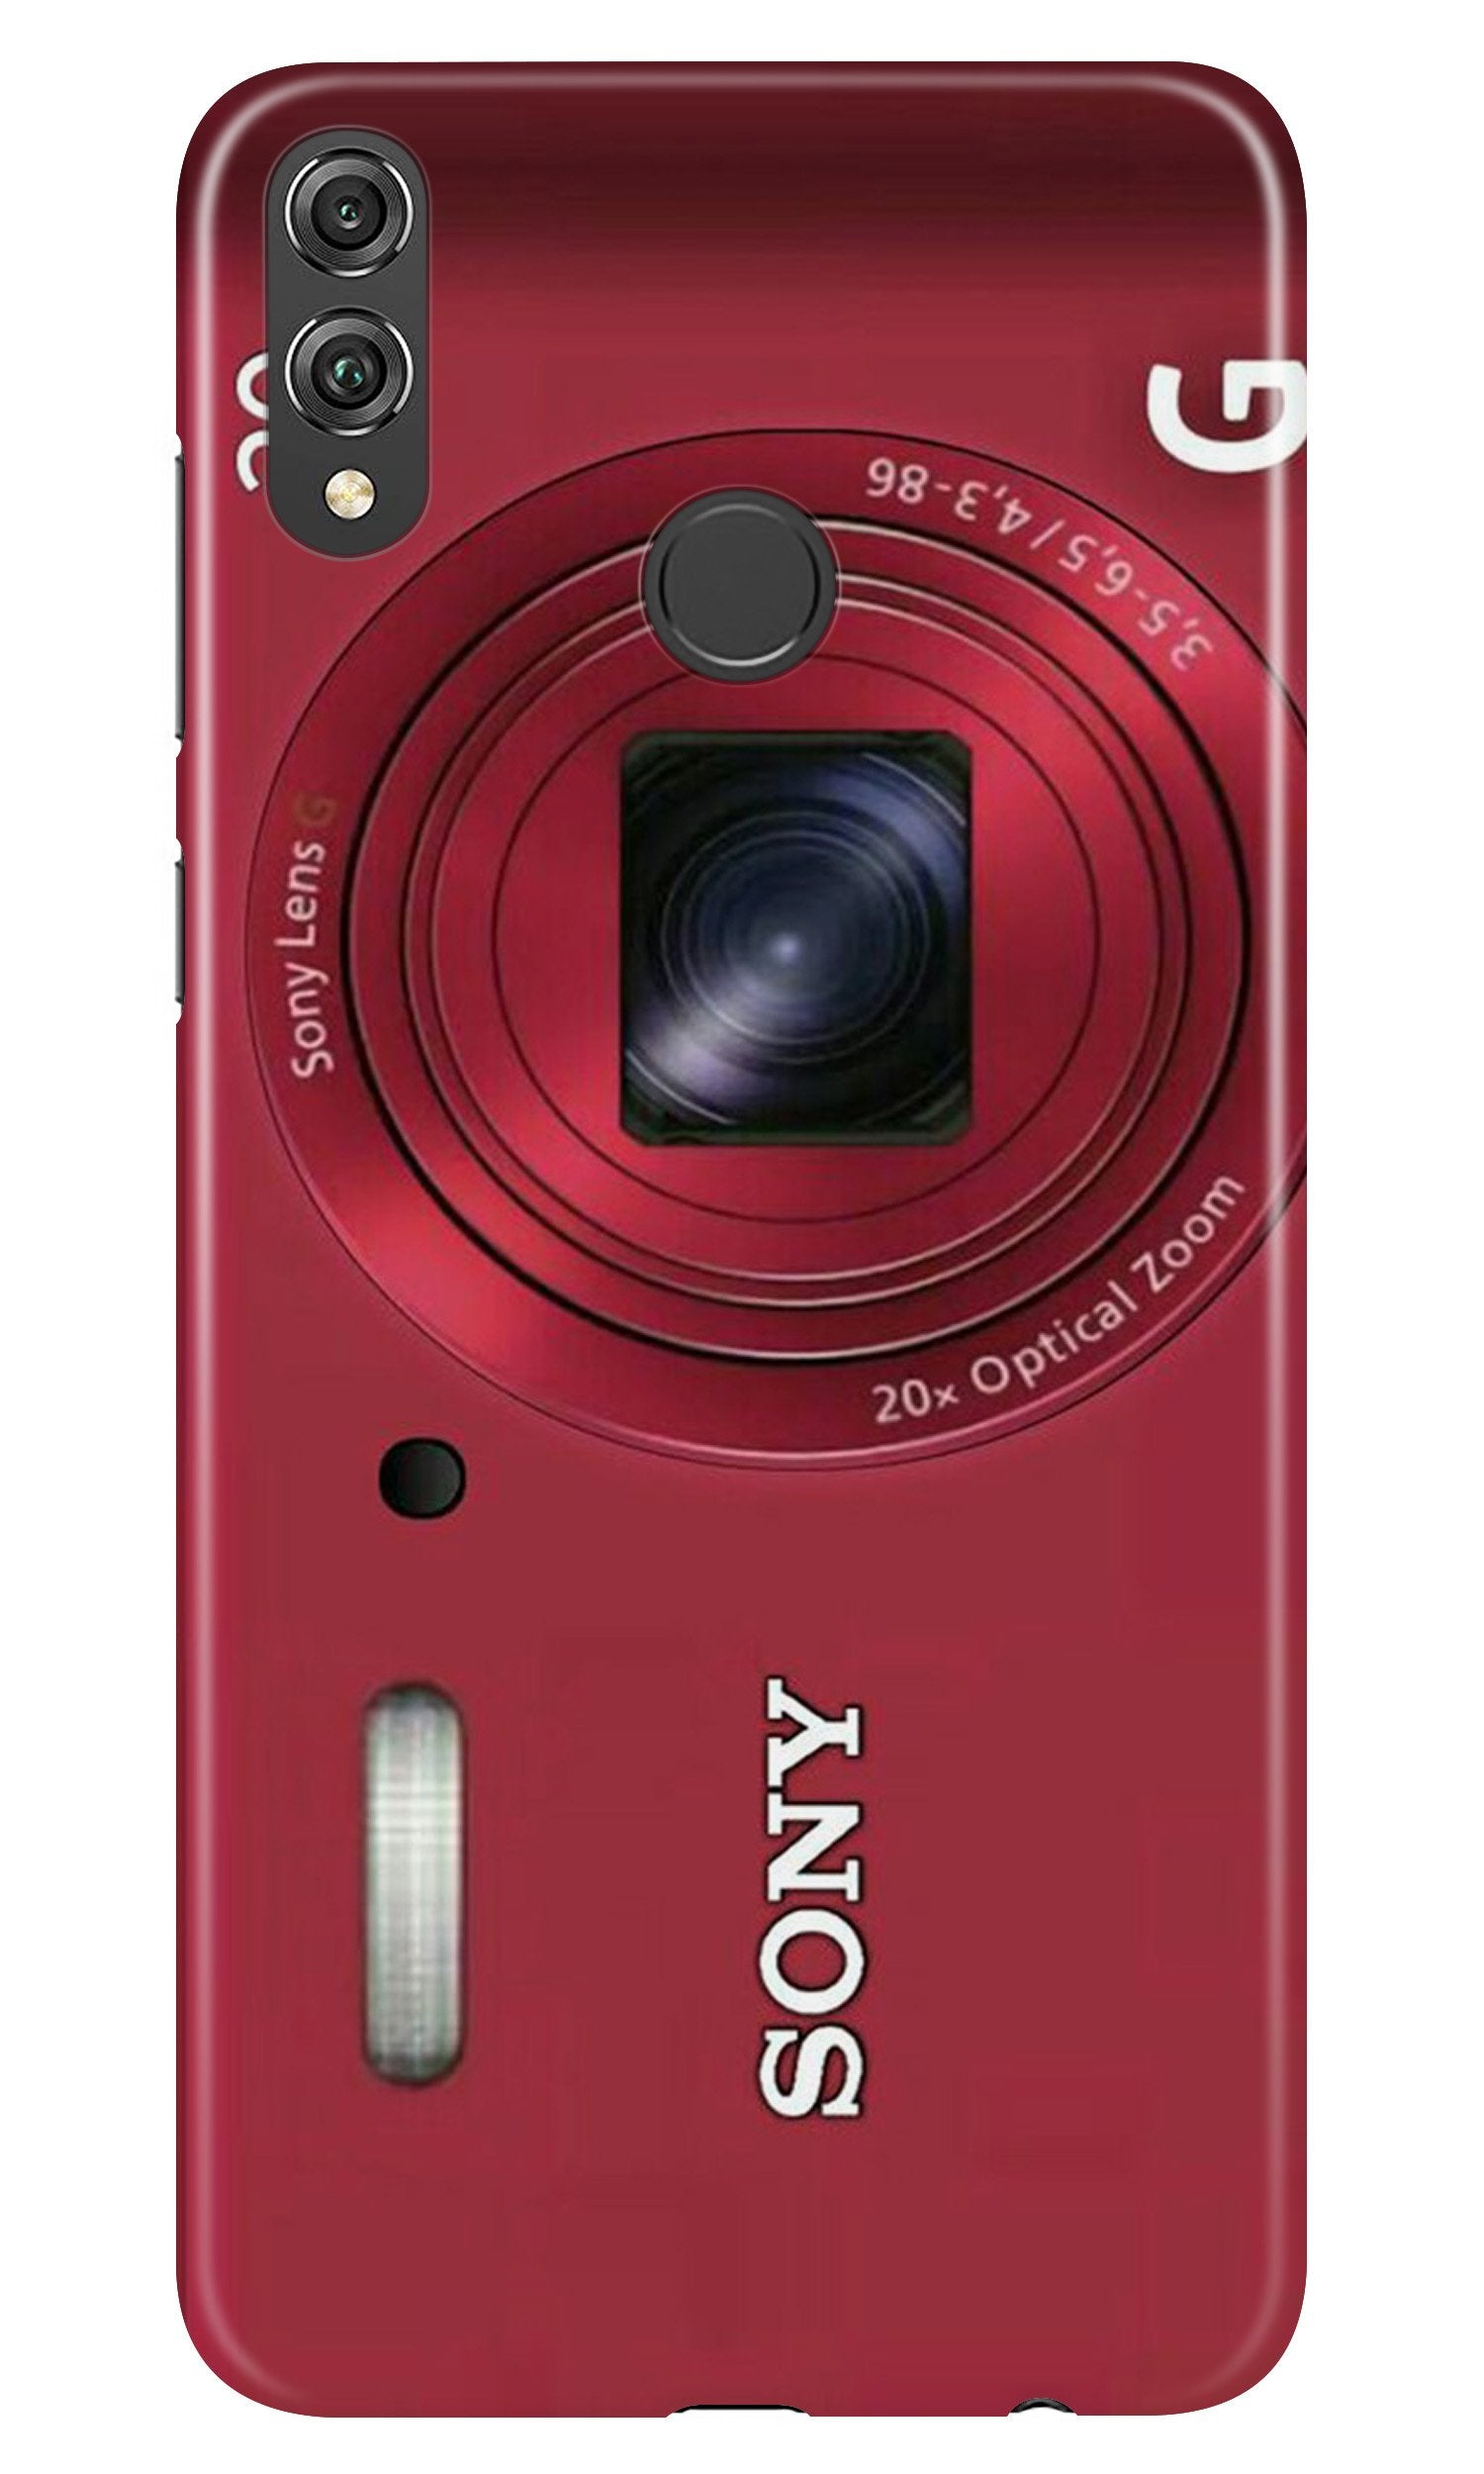 Sony Case for Infinix Hot 7 Pro (Design No. 274)